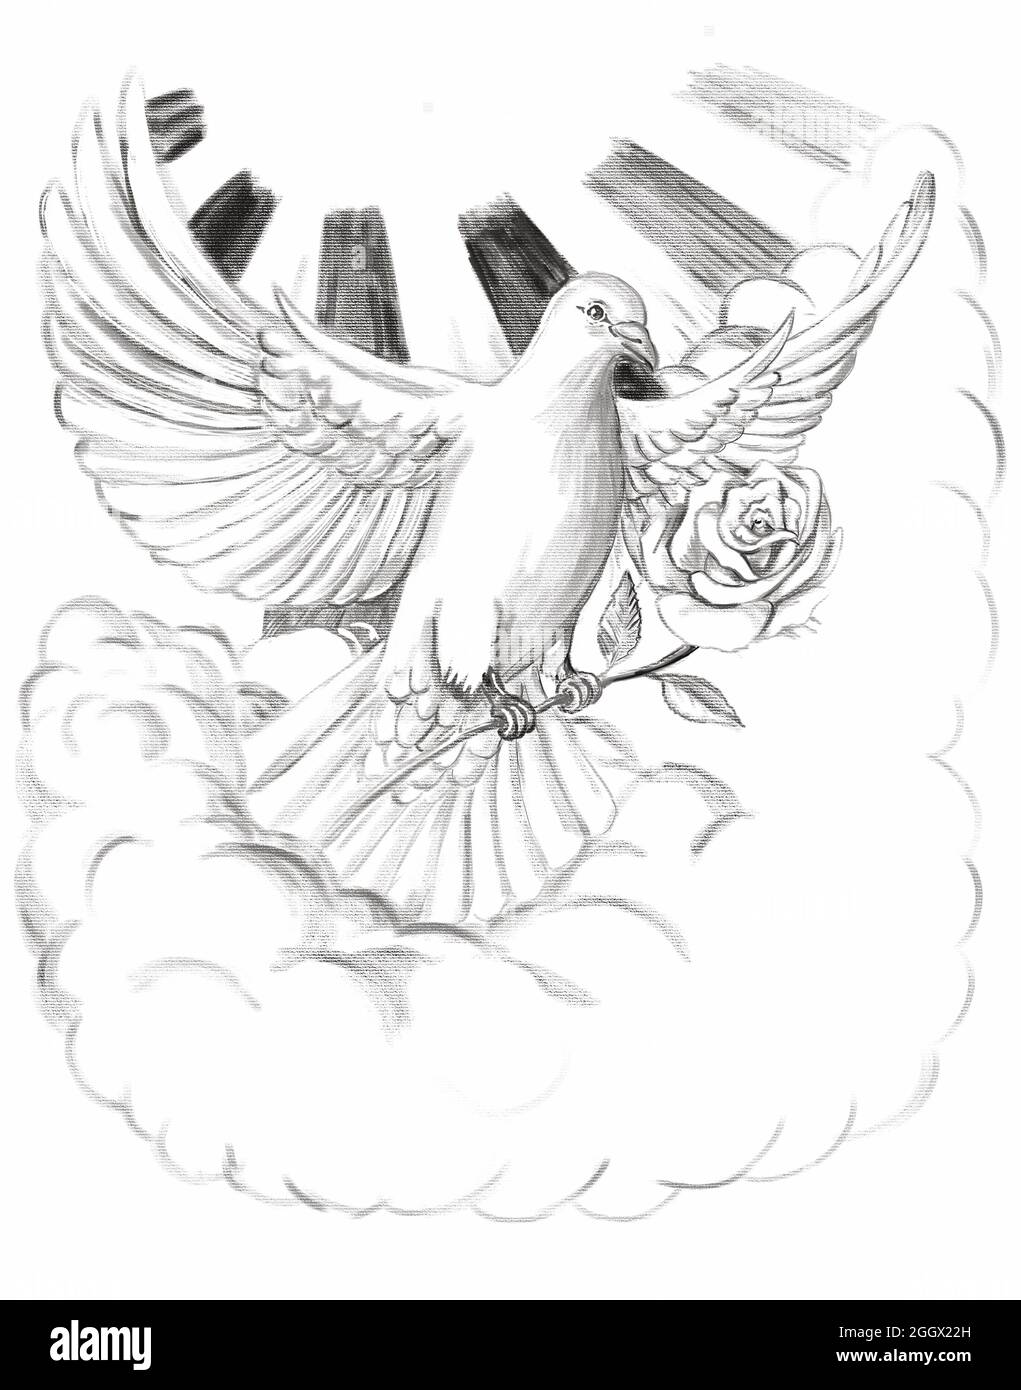 Dove Flying with Wings Spread and Clutching a Rose with Clouds and Sunburst Drawing Tattoo style Banque D'Images